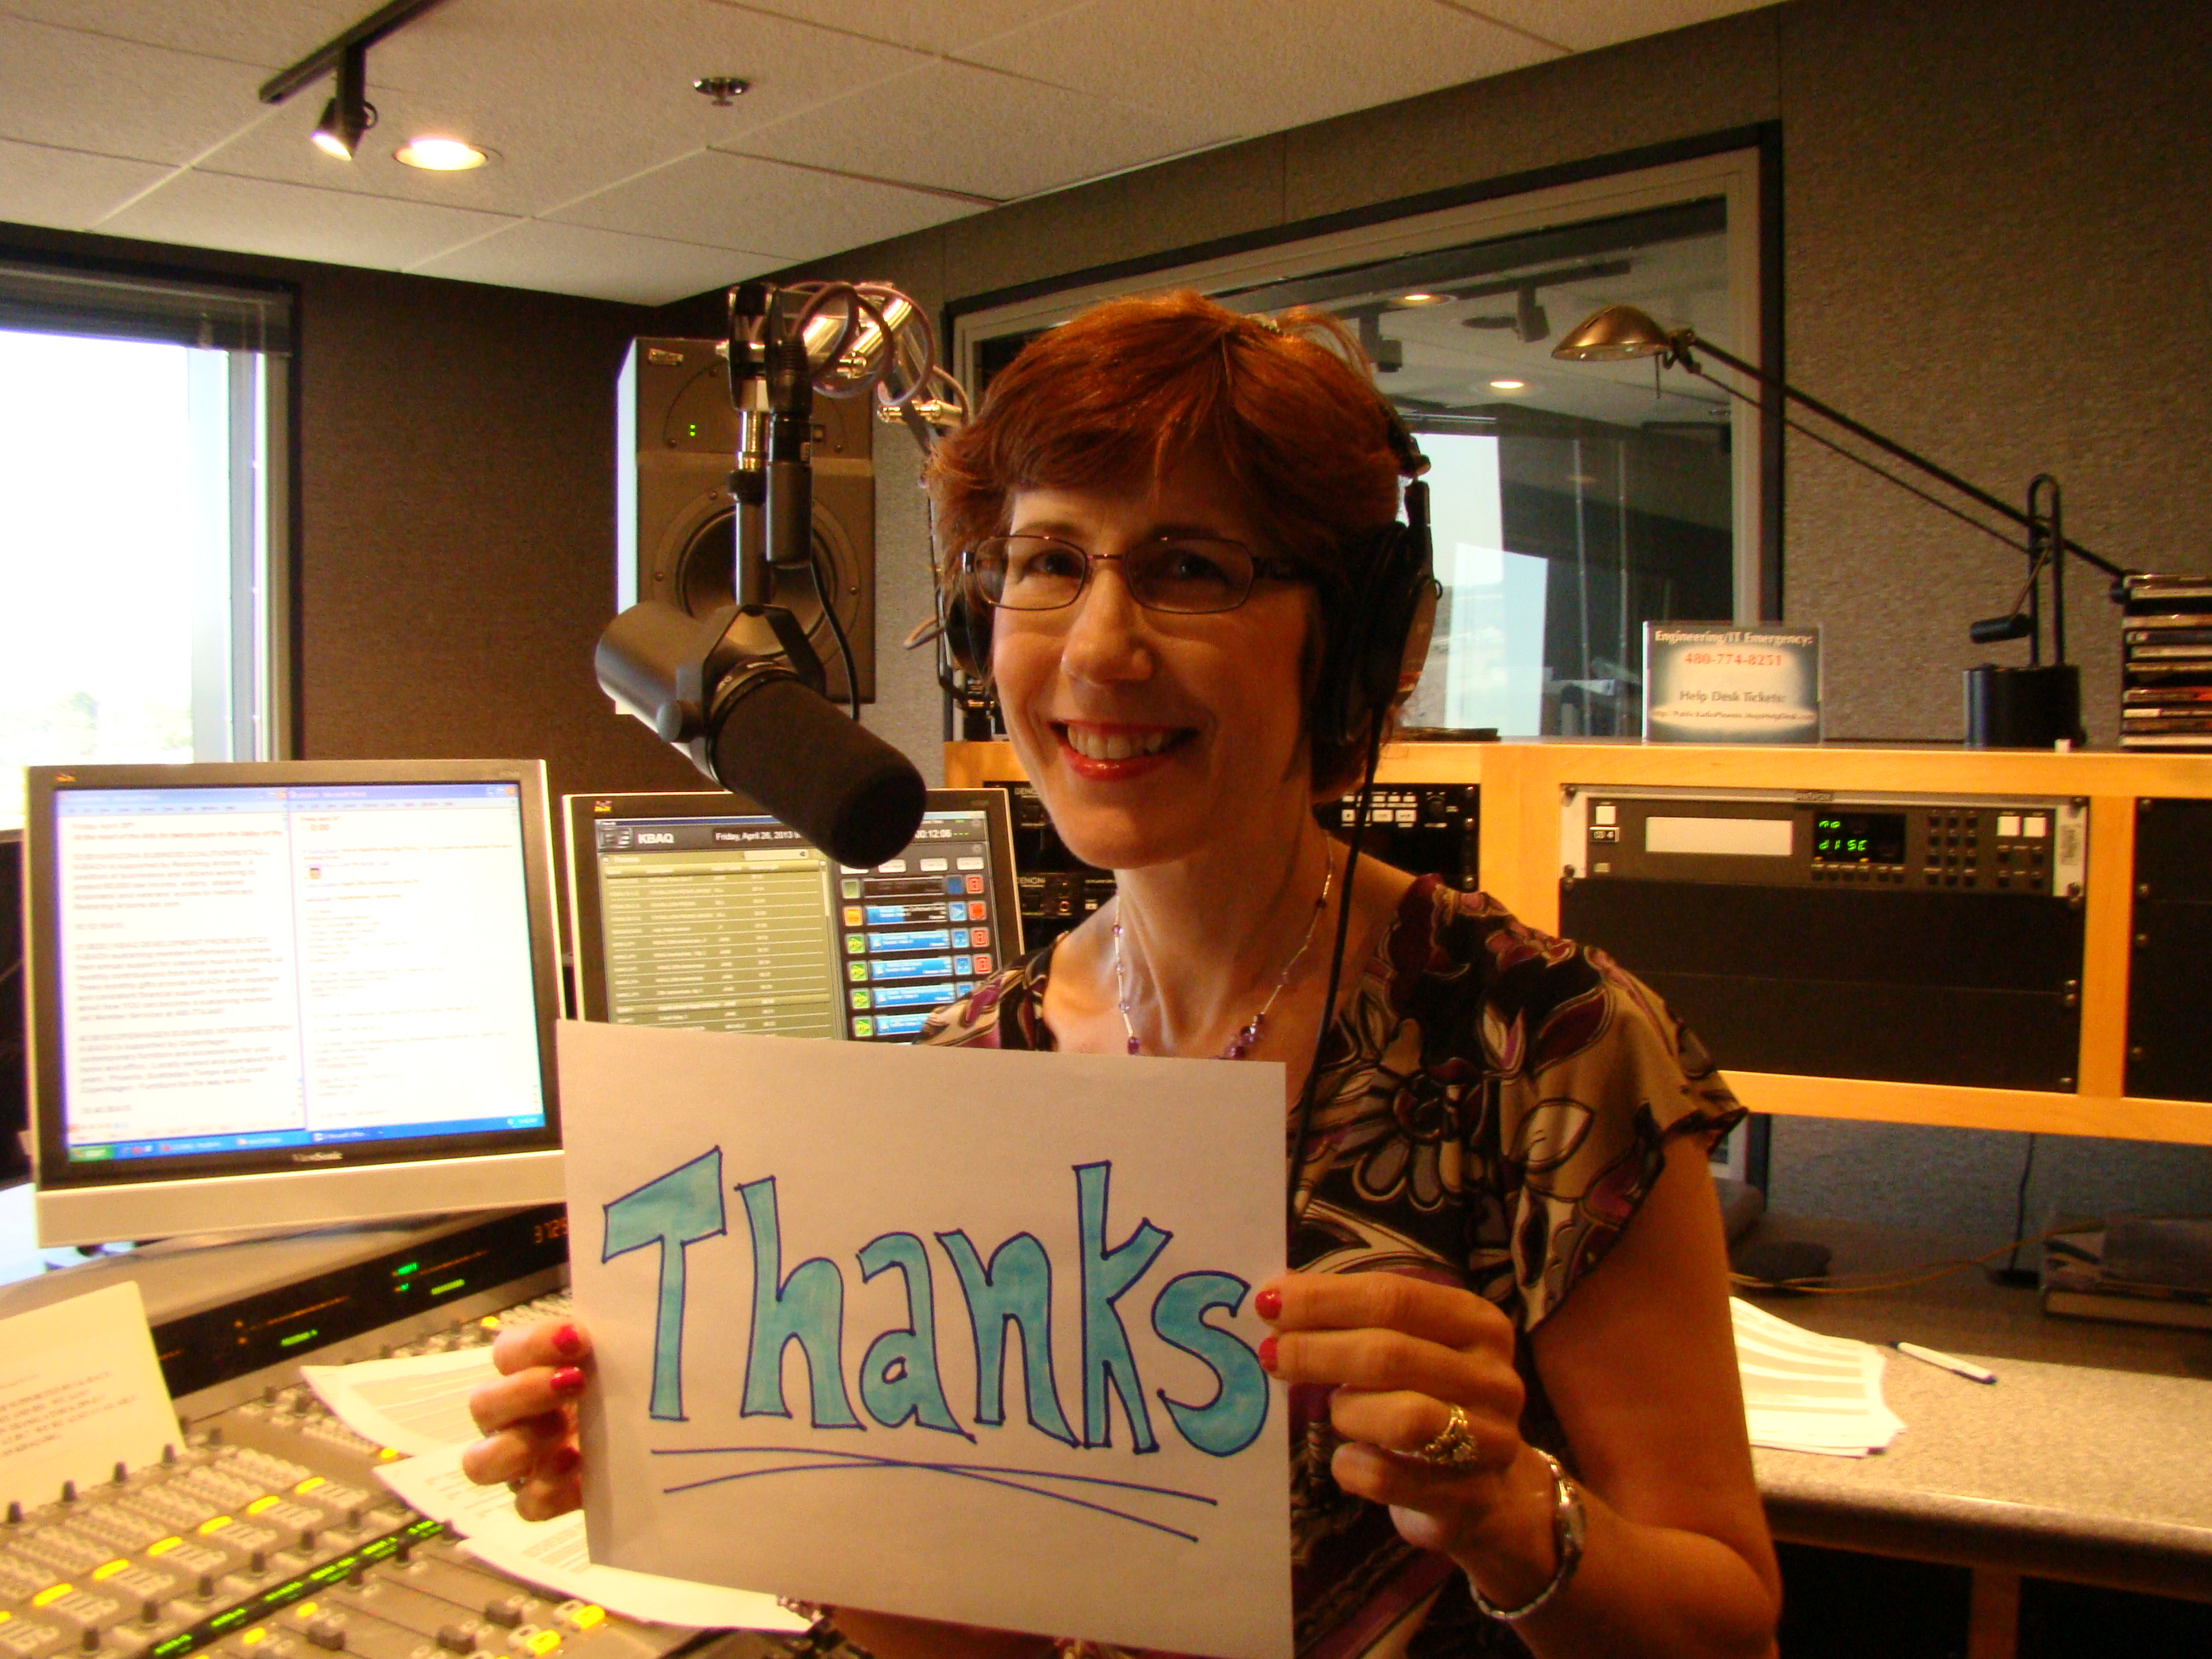 Janine thanks listeners for the birthday wishes, and for 20 years of support!